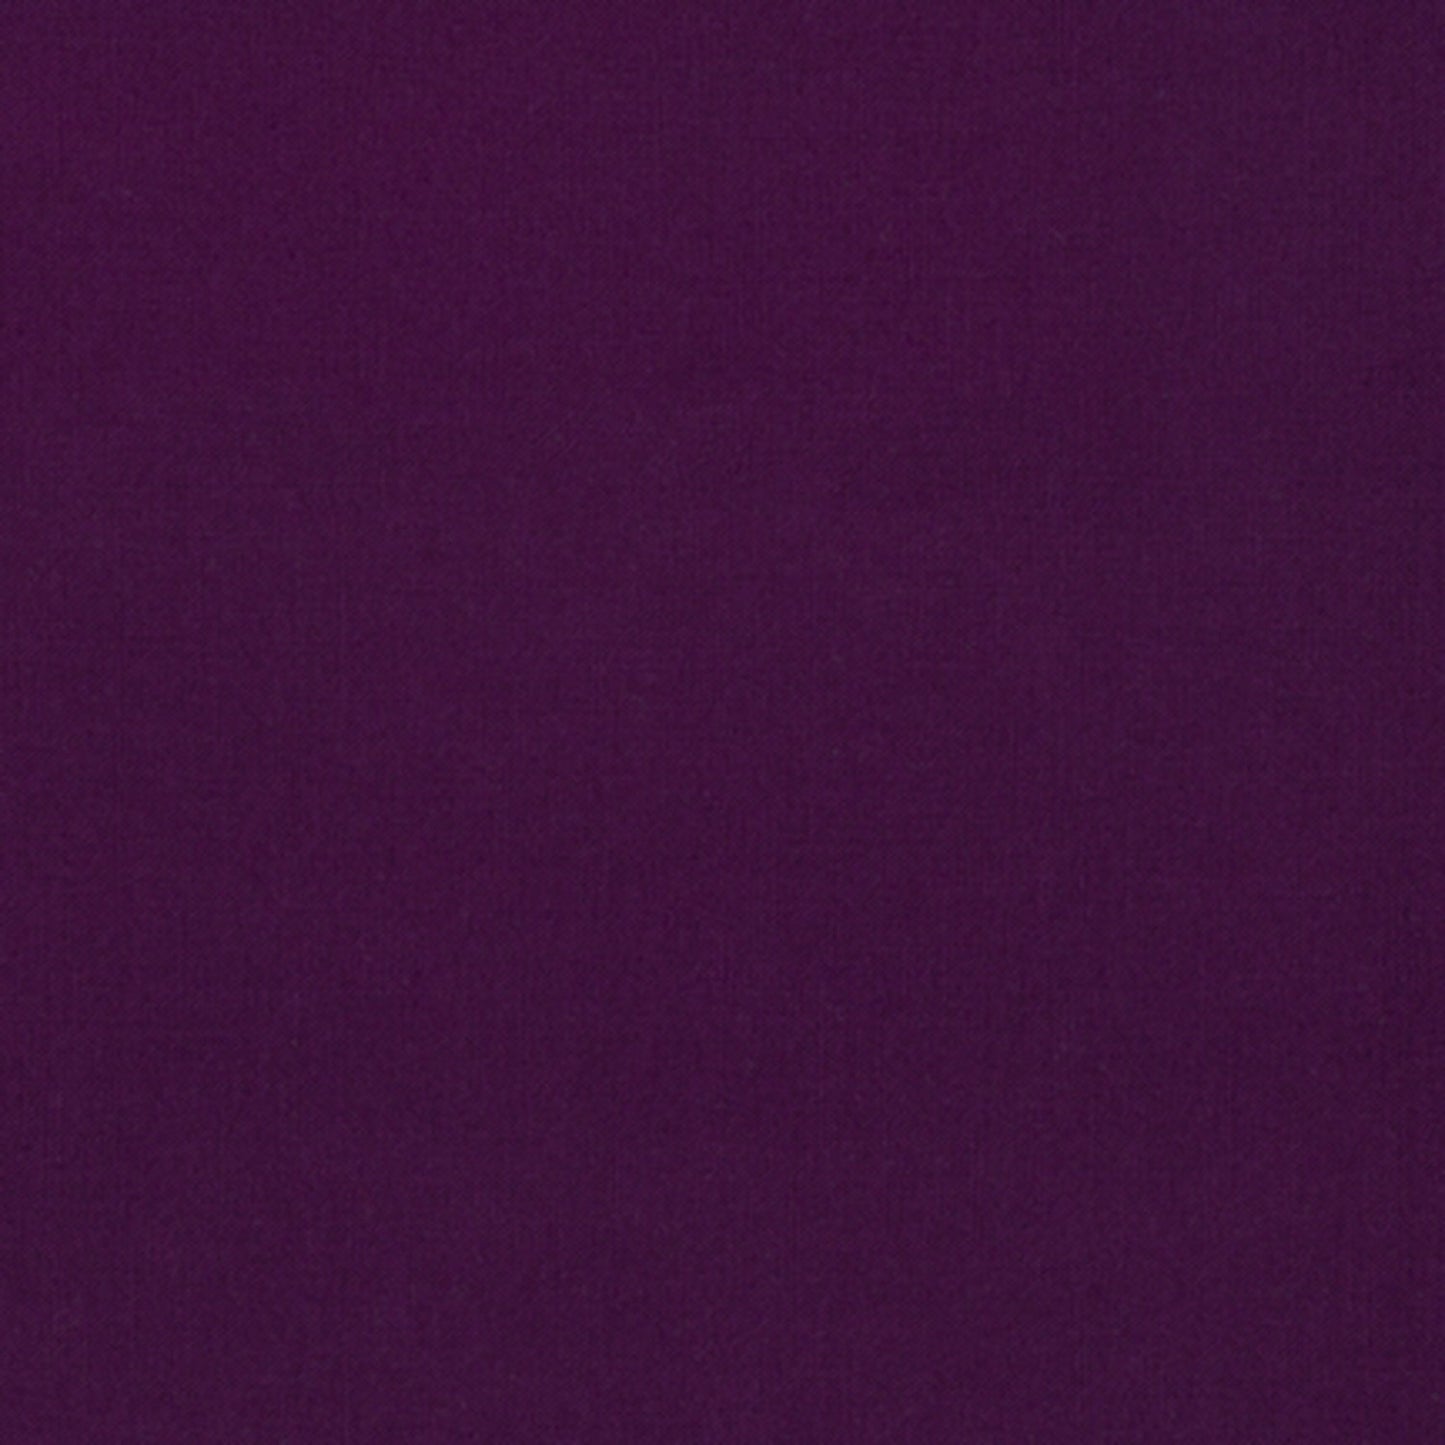 Kona Cotton Solids Eggplant fabric folded for true color reference